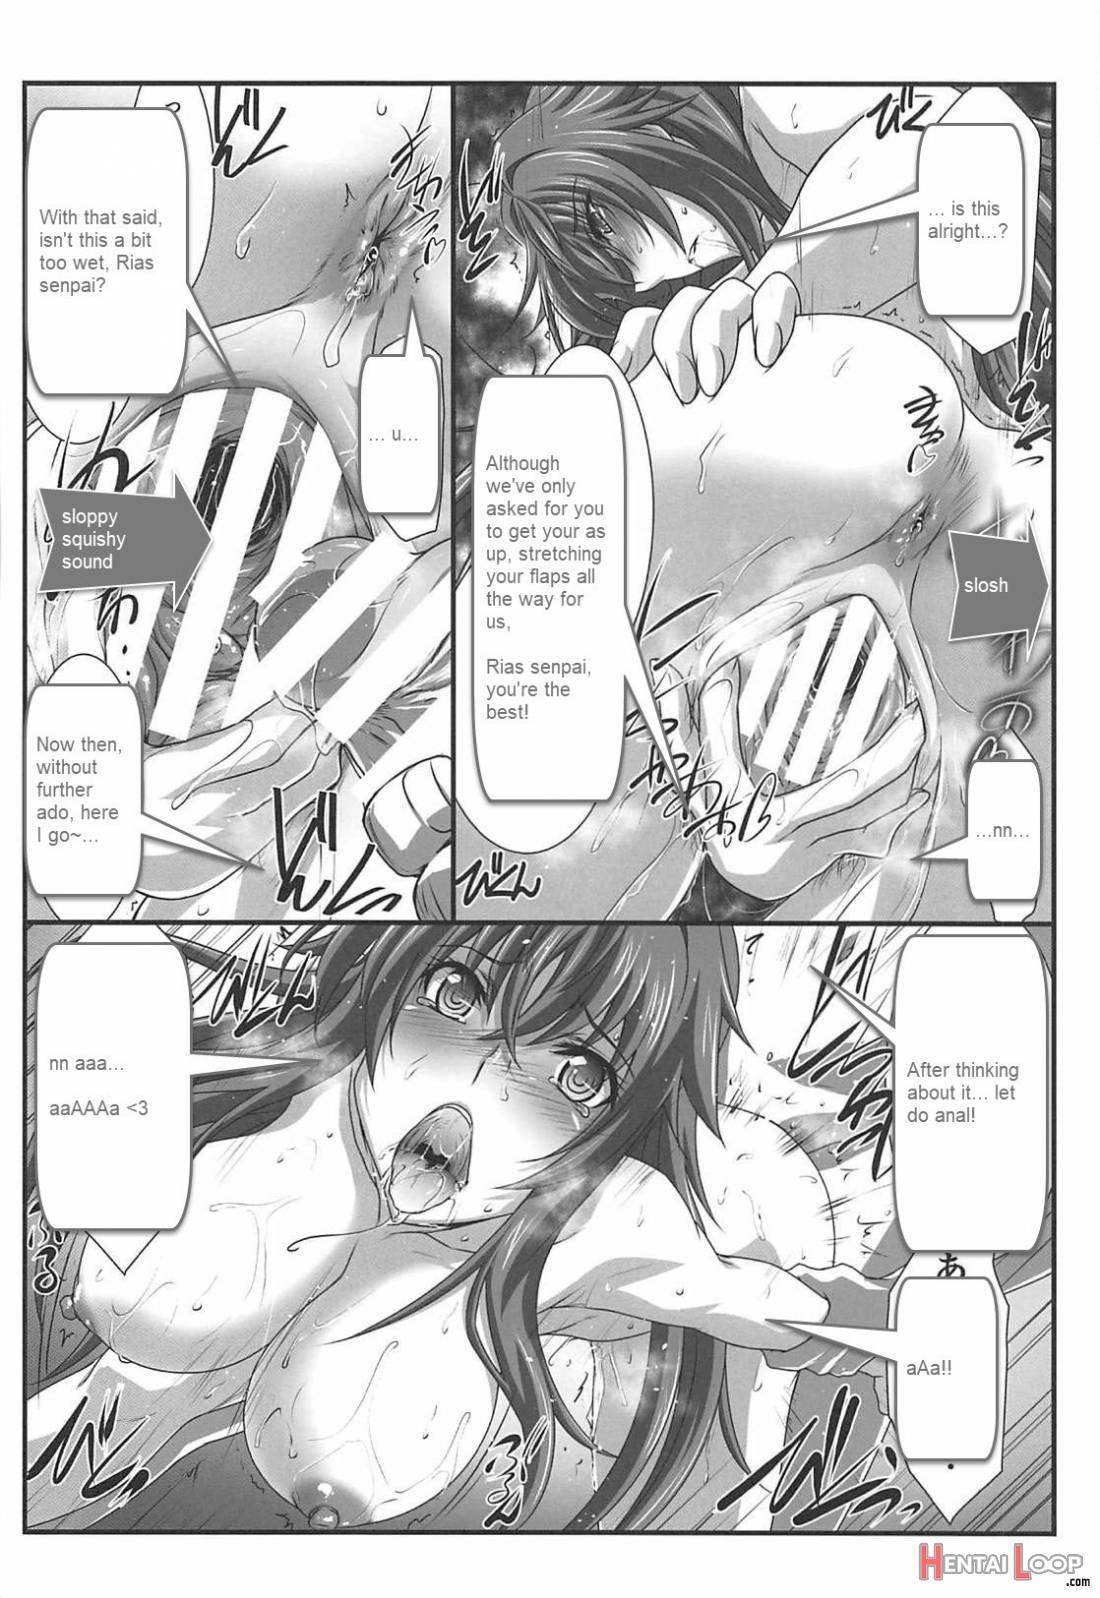 SPIRAL ZONE DxD II page 9